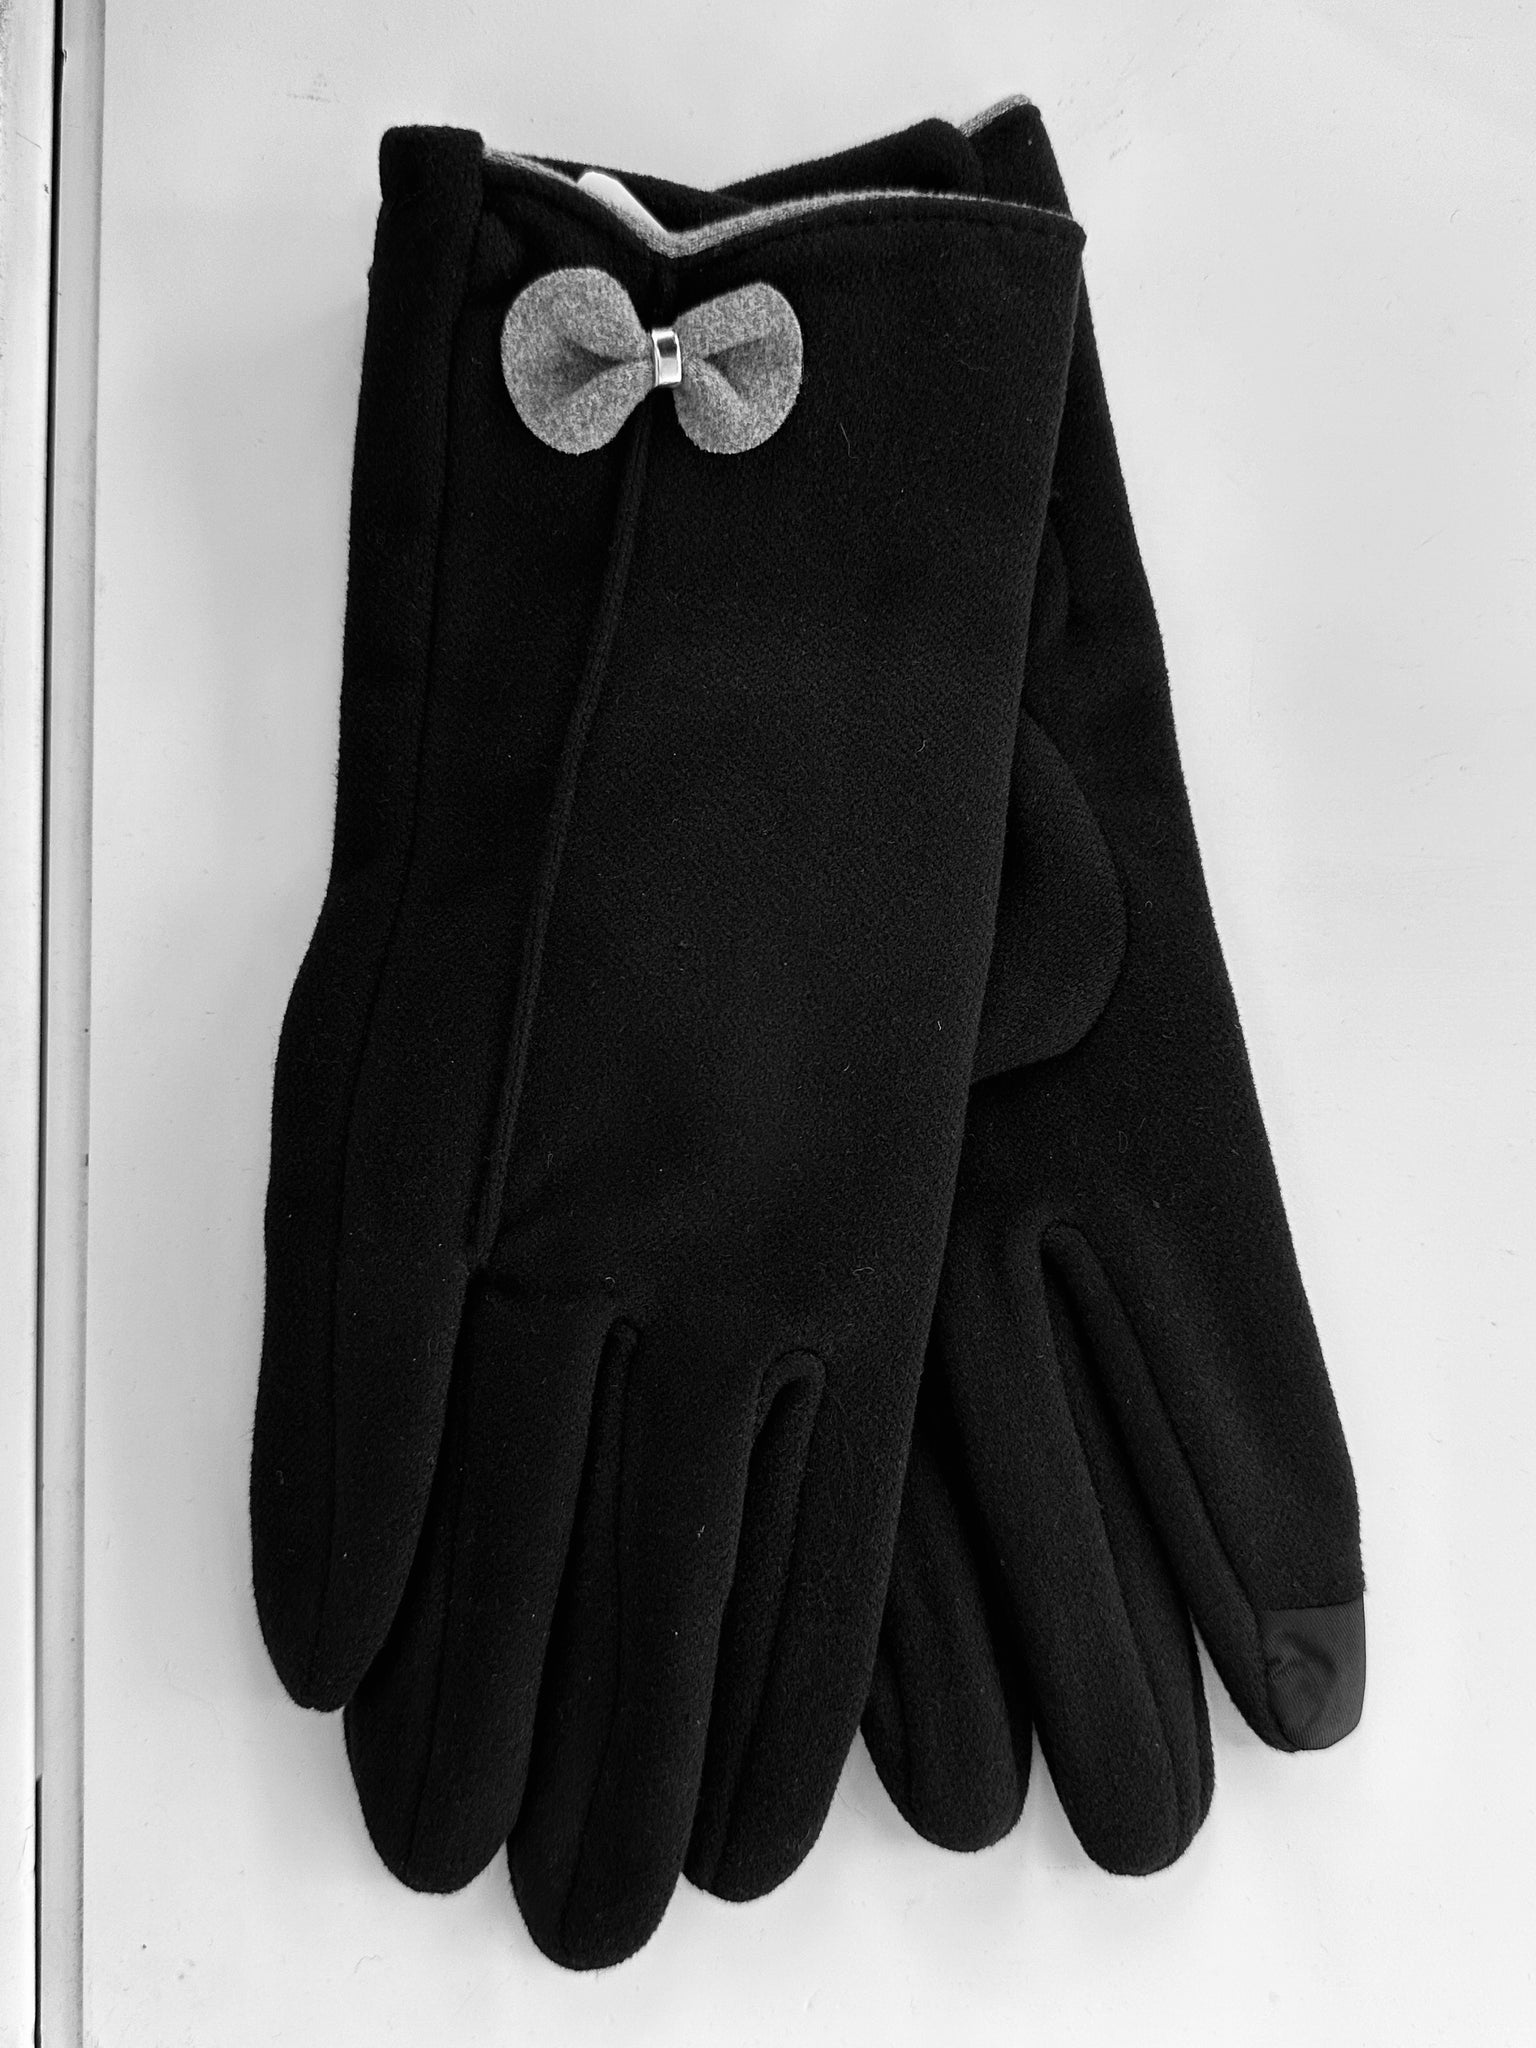 Jane Beautiful Black Texting Gloves with Grey Bow Accents